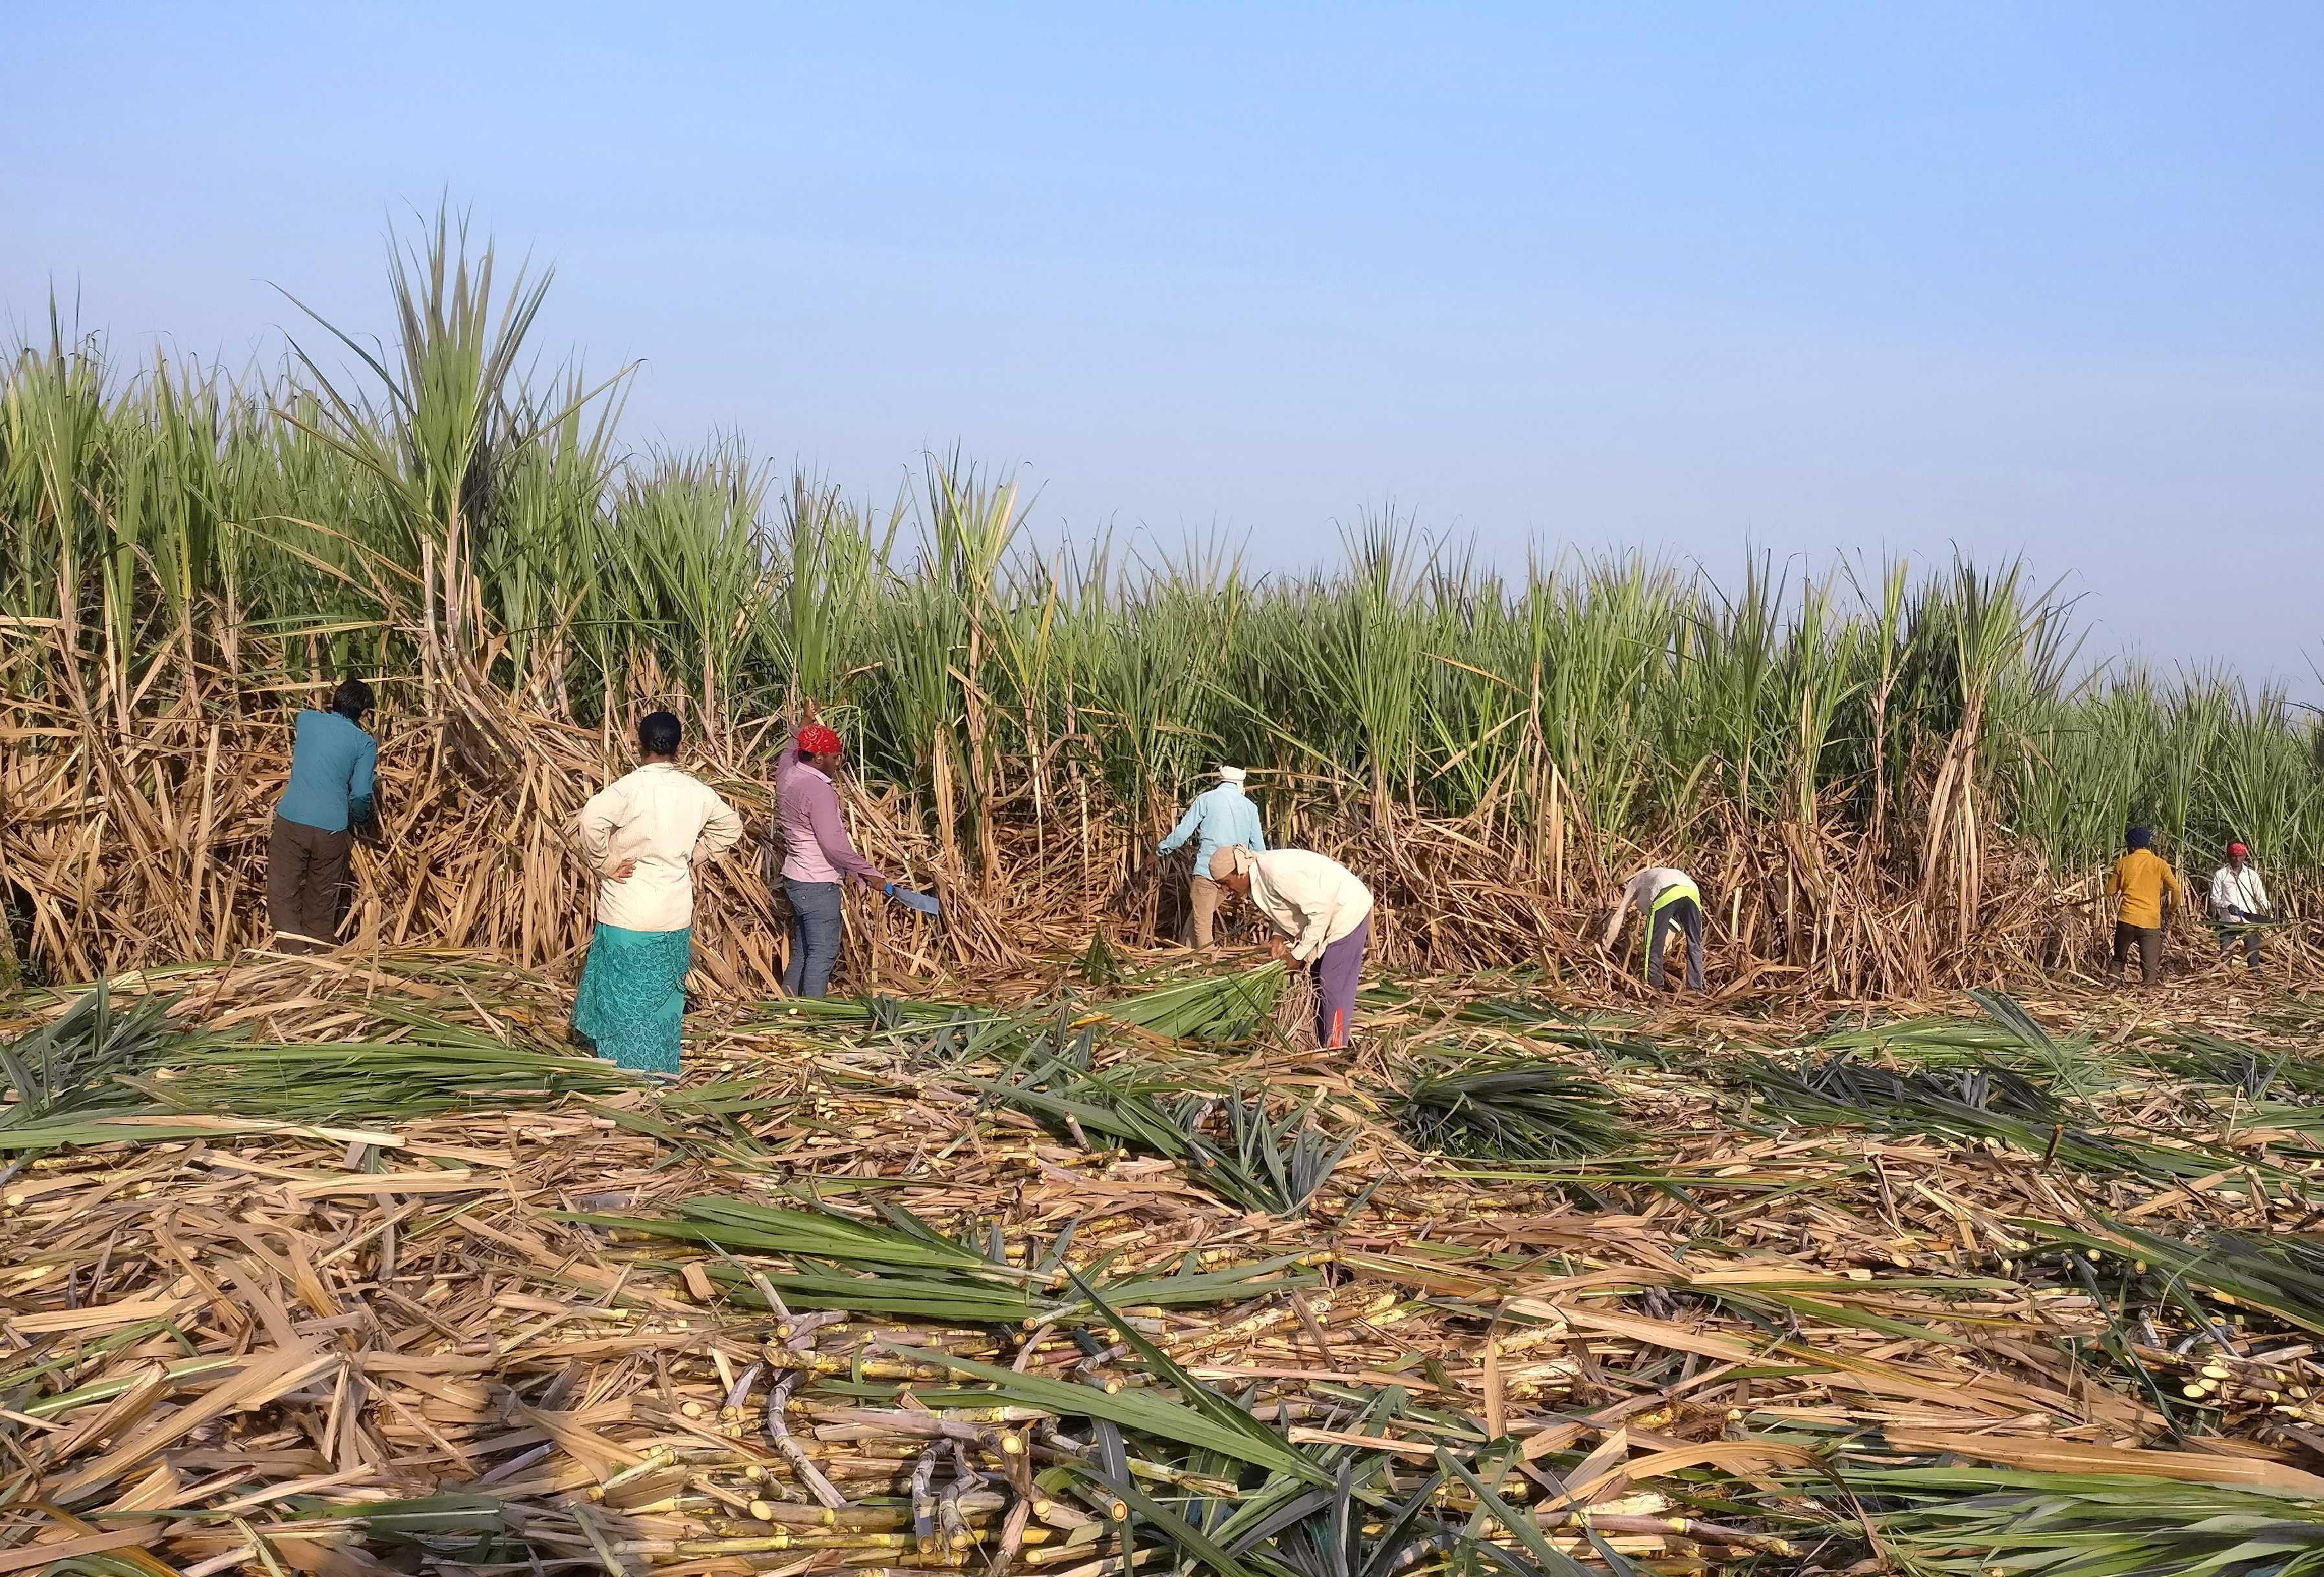 Workers harvest sugarcane in a field in Gove village in the western state of Maharashtra, India, Nov 5, 2018. Photo: Reuters